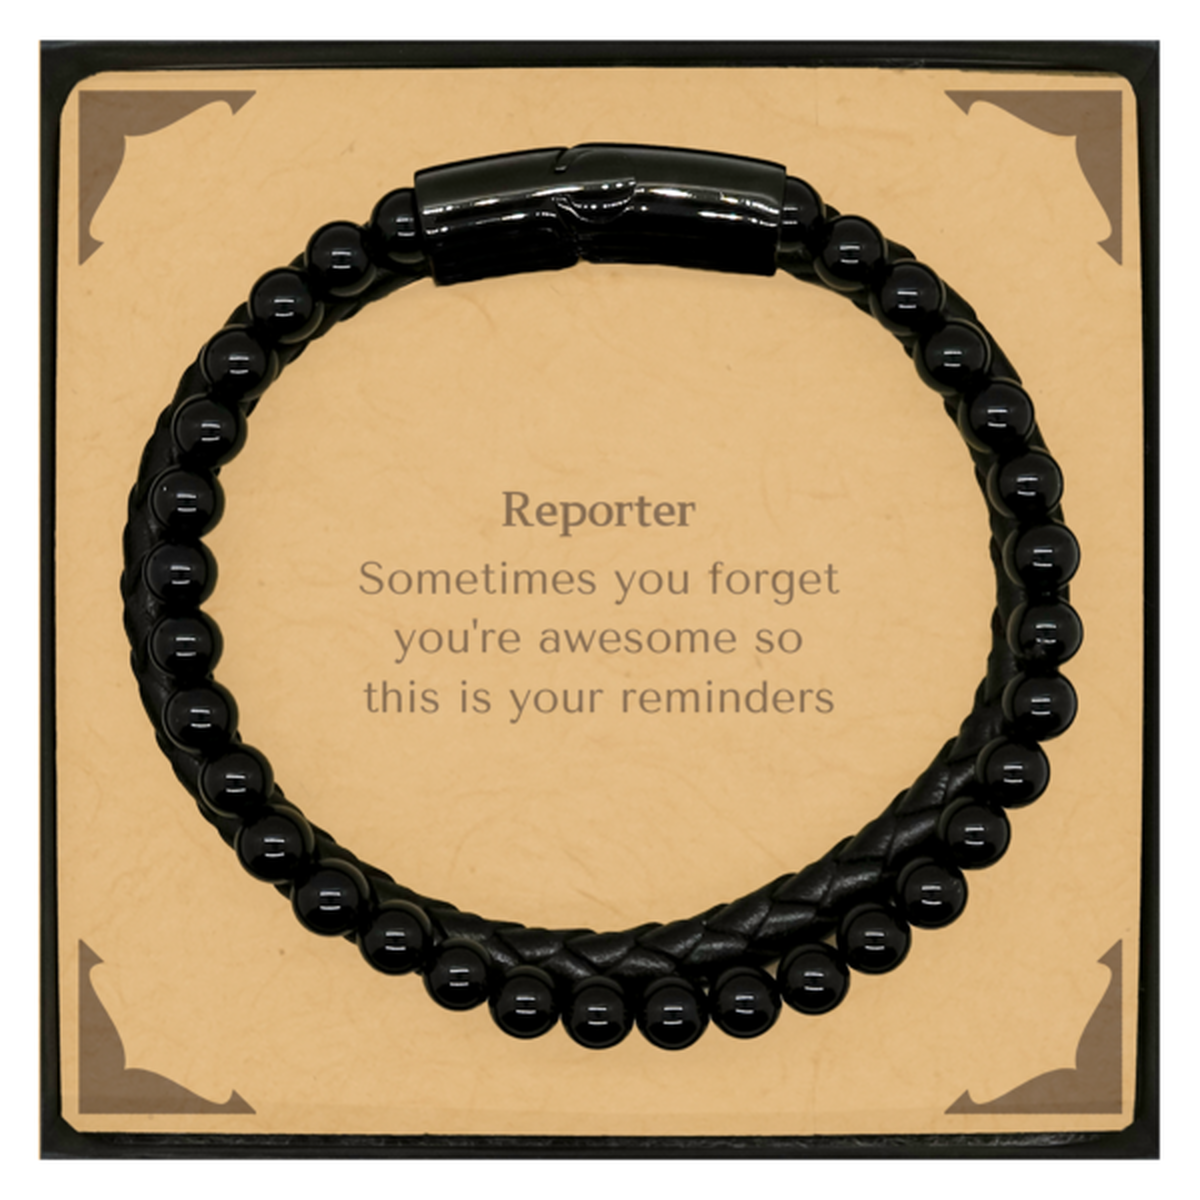 Sentimental Reporter Stone Leather Bracelets, Reporter Sometimes you forget you're awesome so this is your reminders, Graduation Christmas Birthday Gifts for Reporter, Men, Women, Coworkers